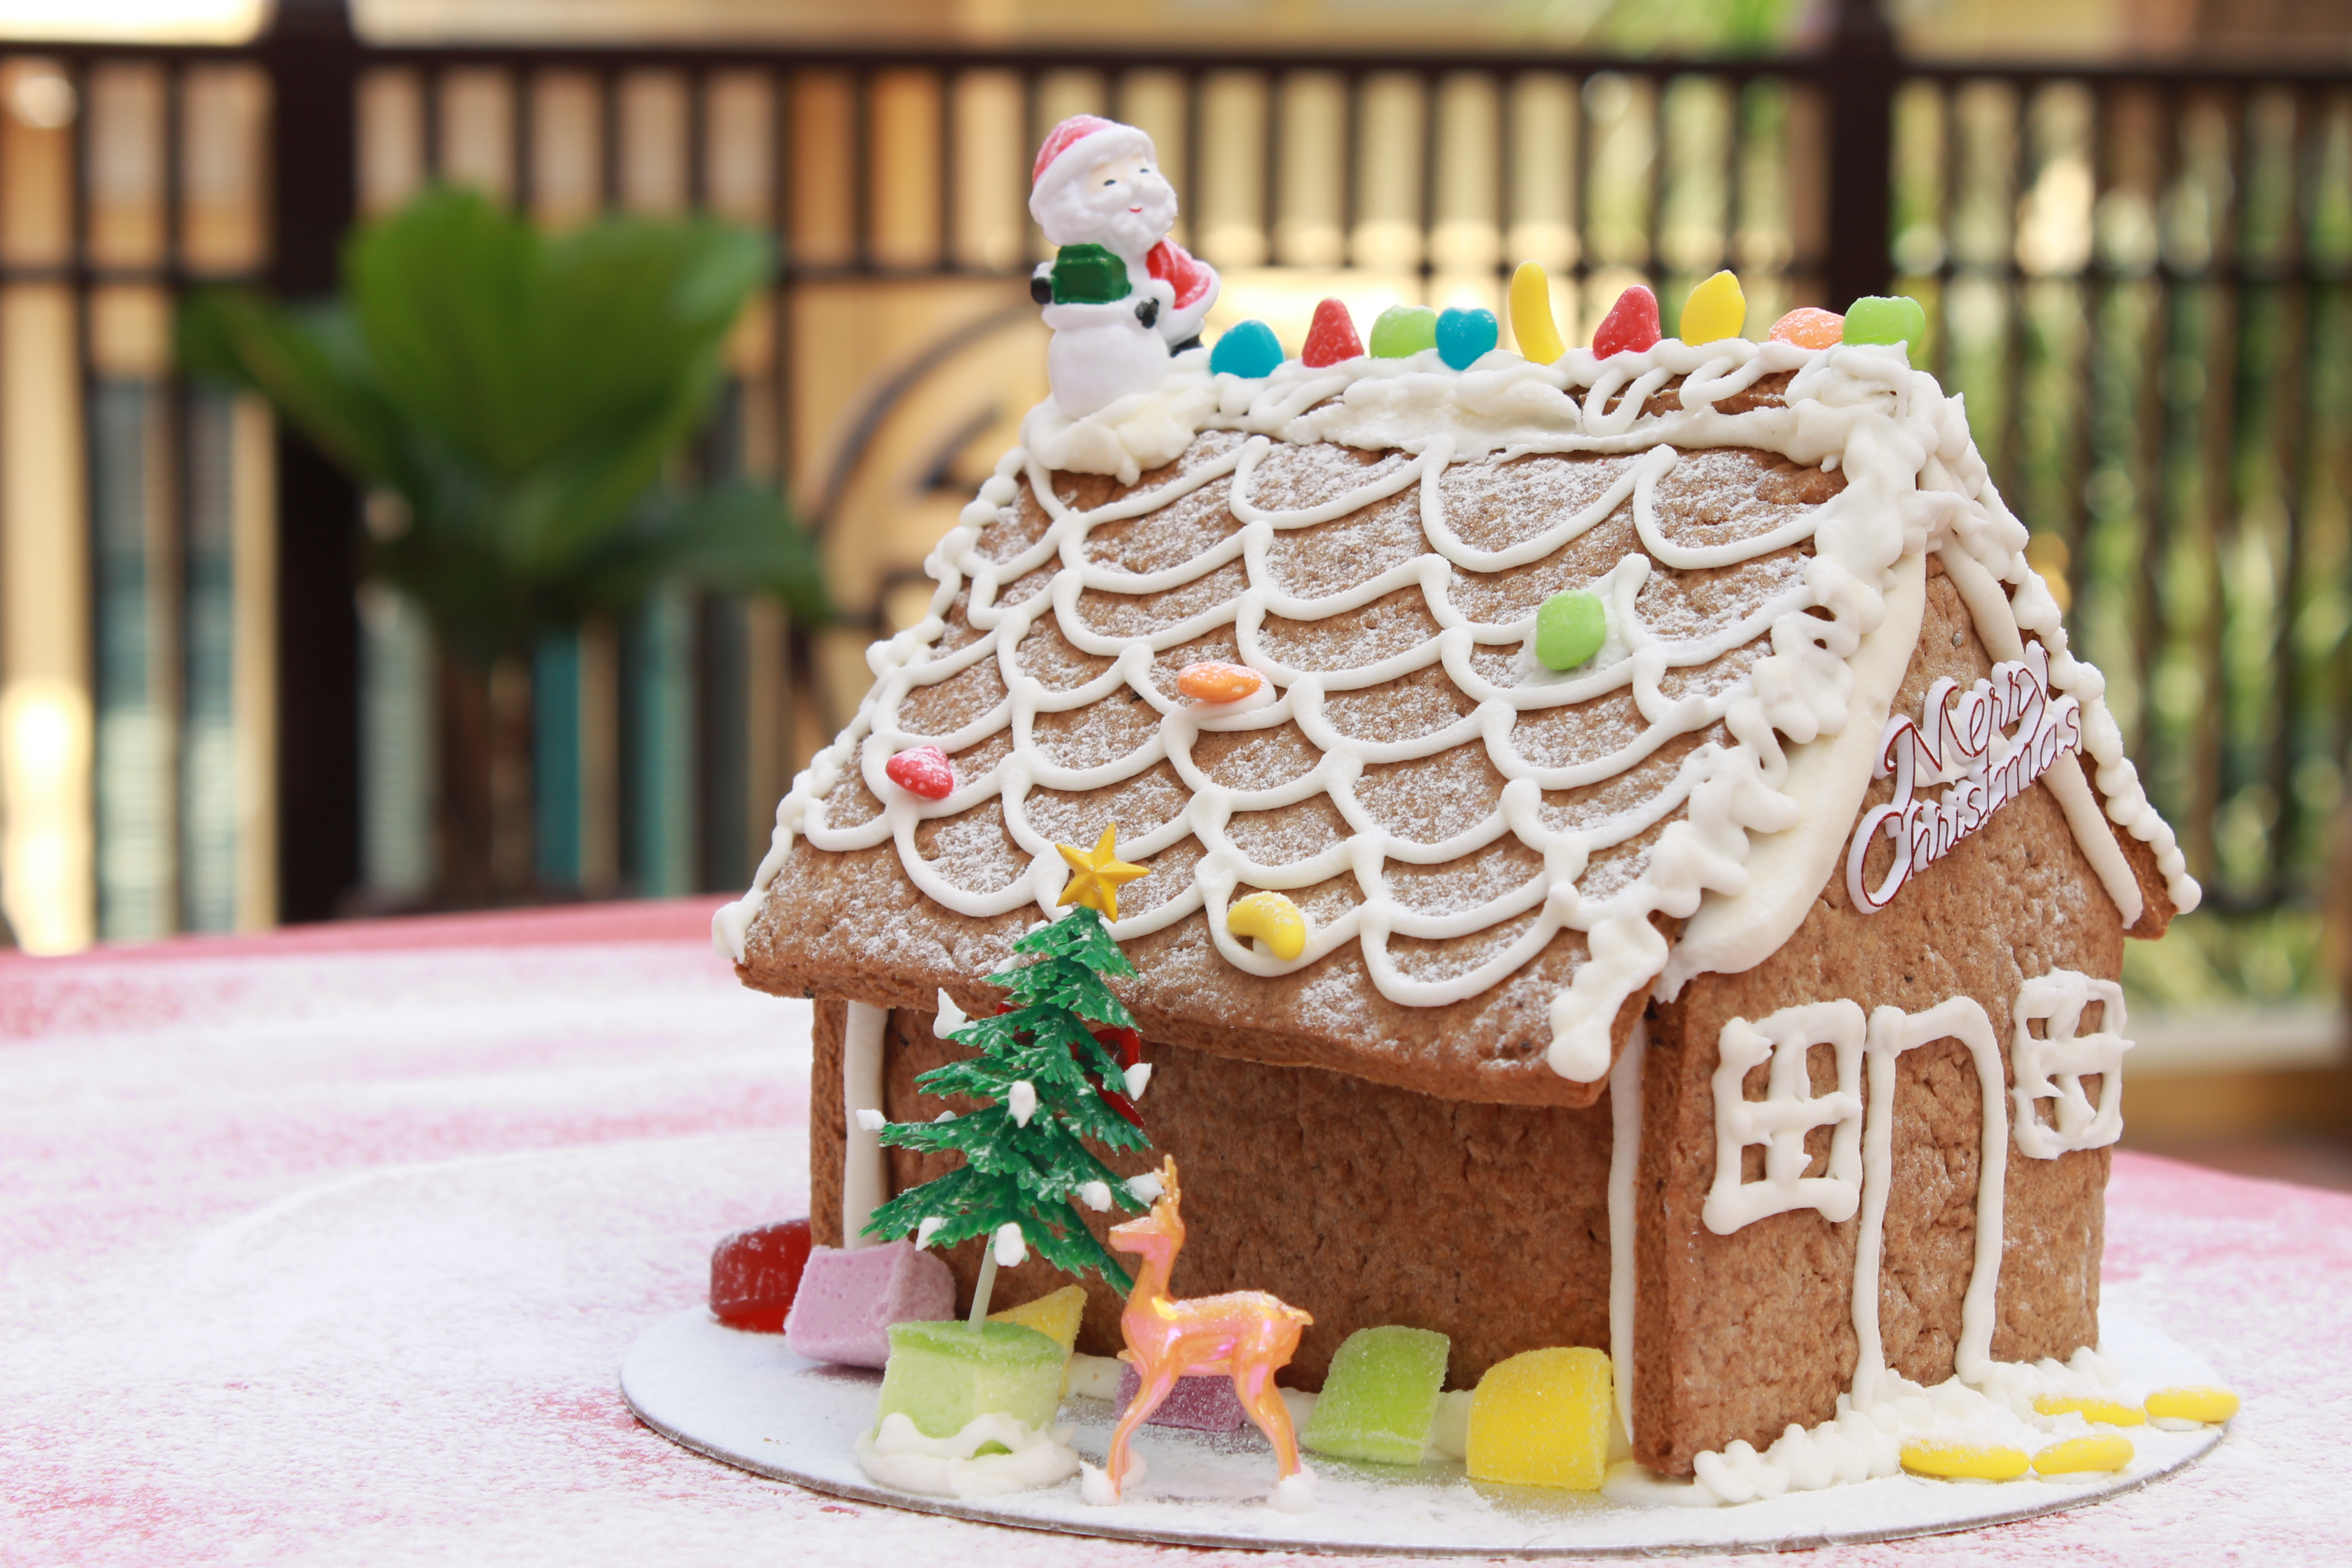 Complete gingerbread decorating kit to create delicious and decorative treats